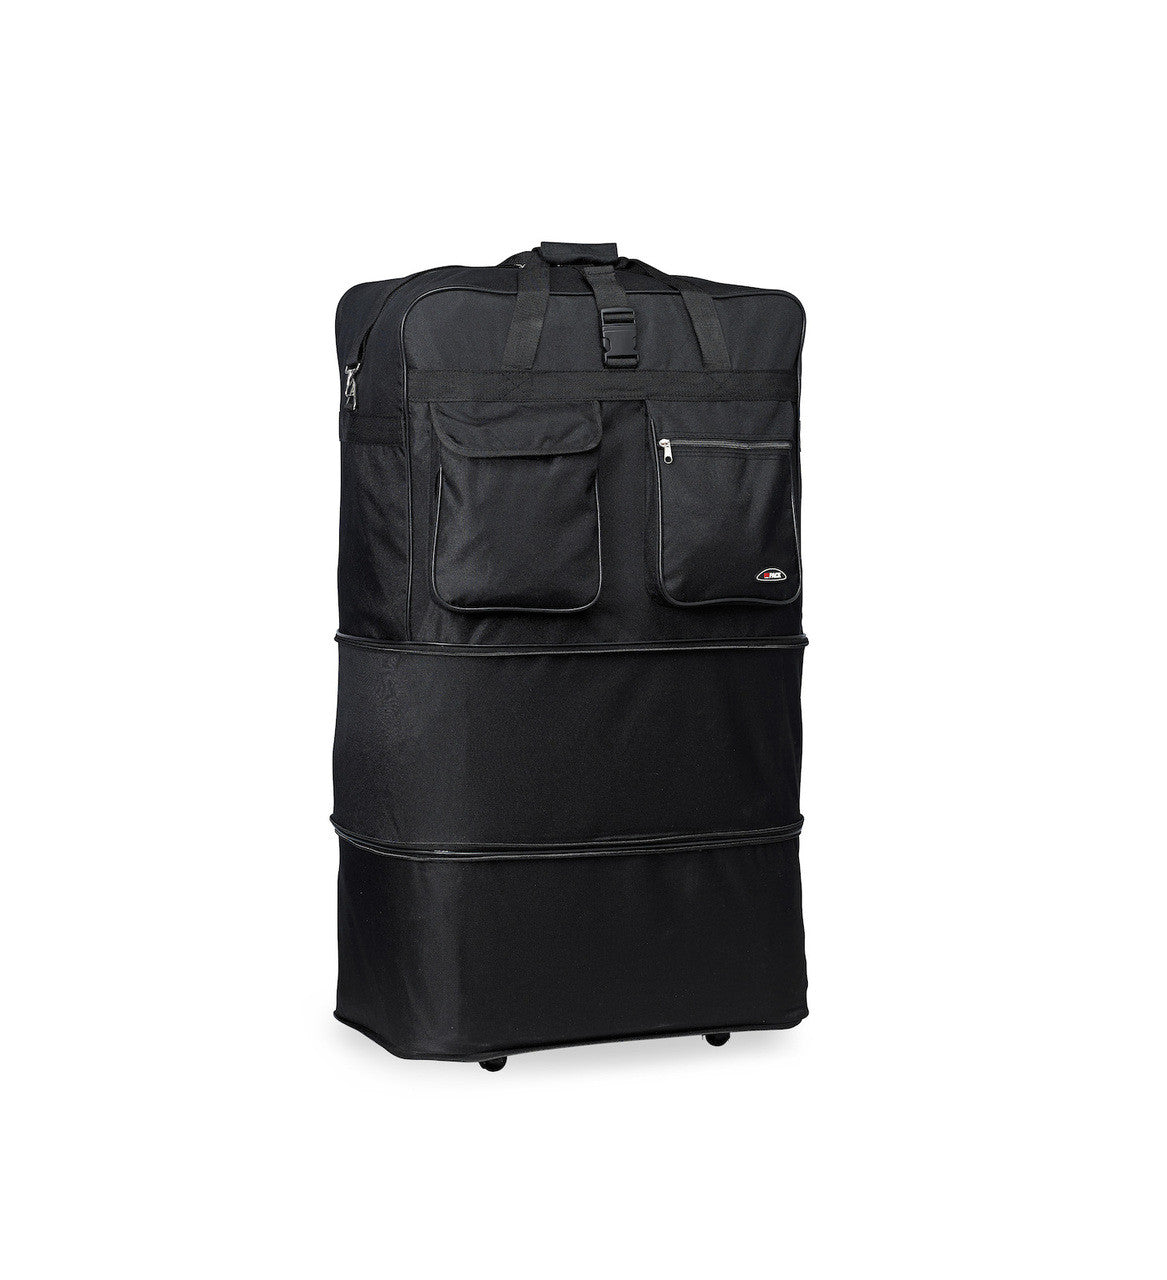 Cargo Travel Bag   36 inches